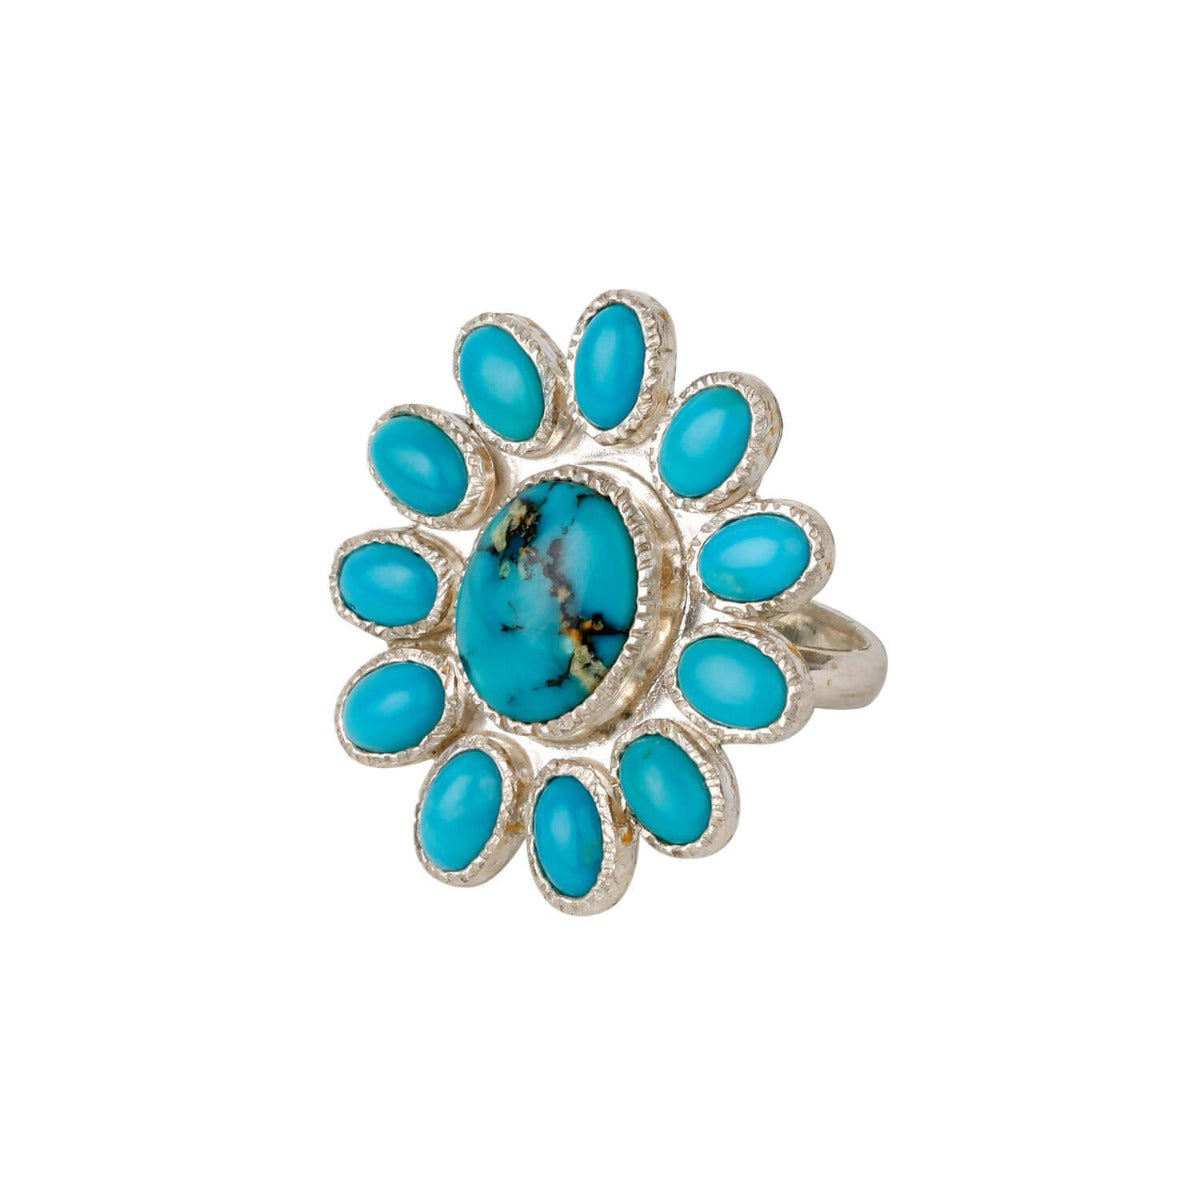 Turquoise sterling silver ring